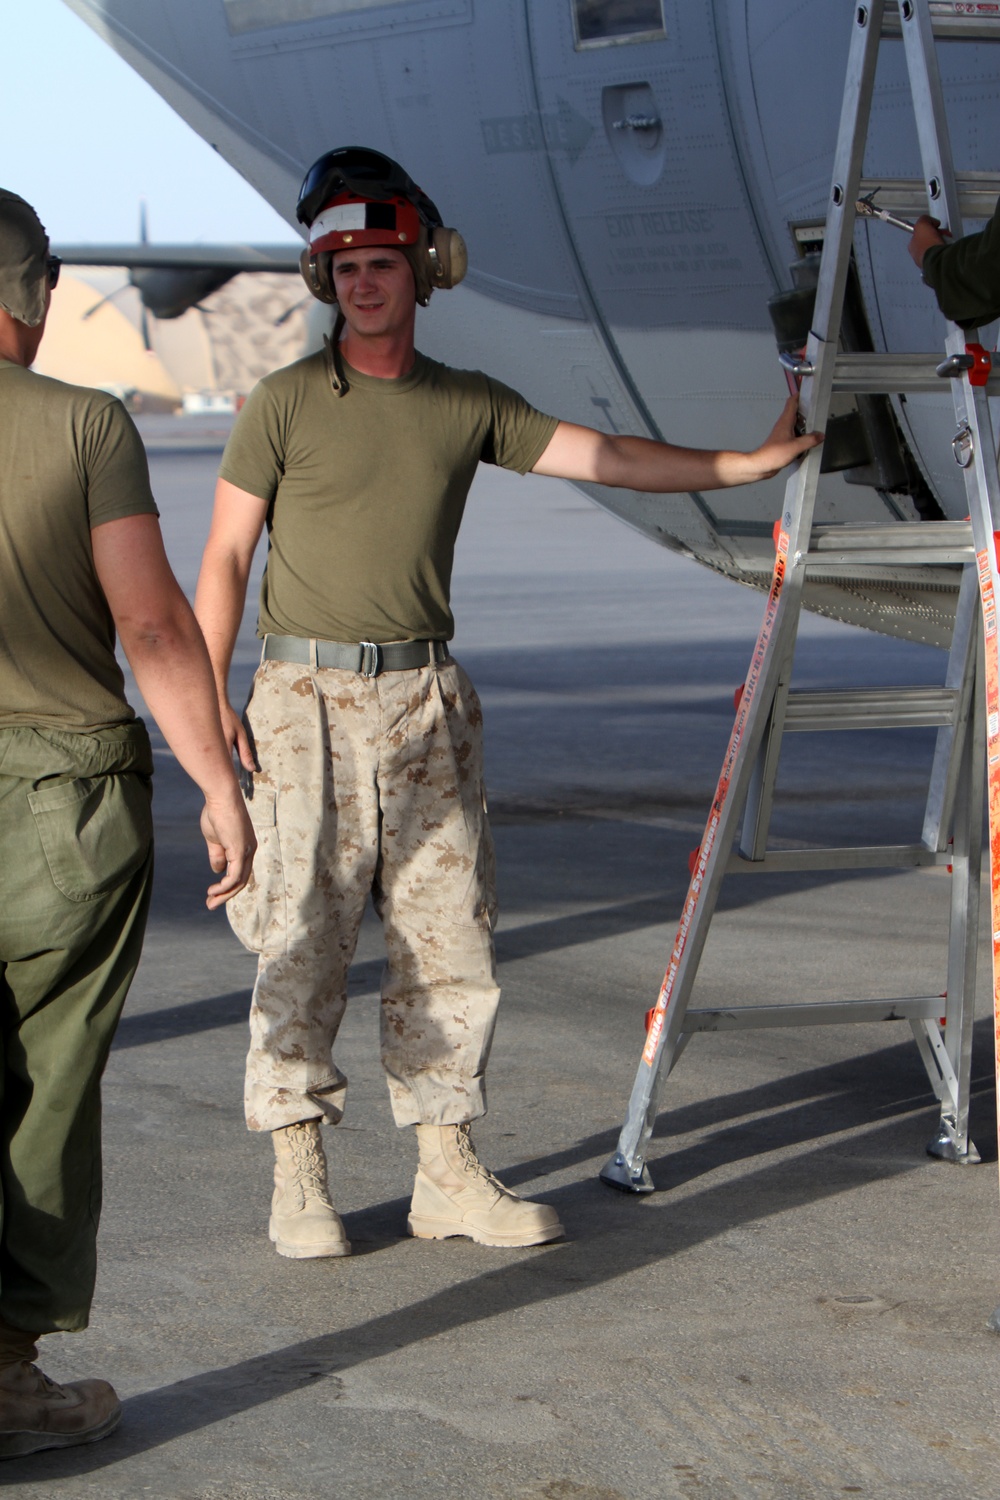 The Marines of Marine Aerial Refueler Transport Squadrons 352 and 152